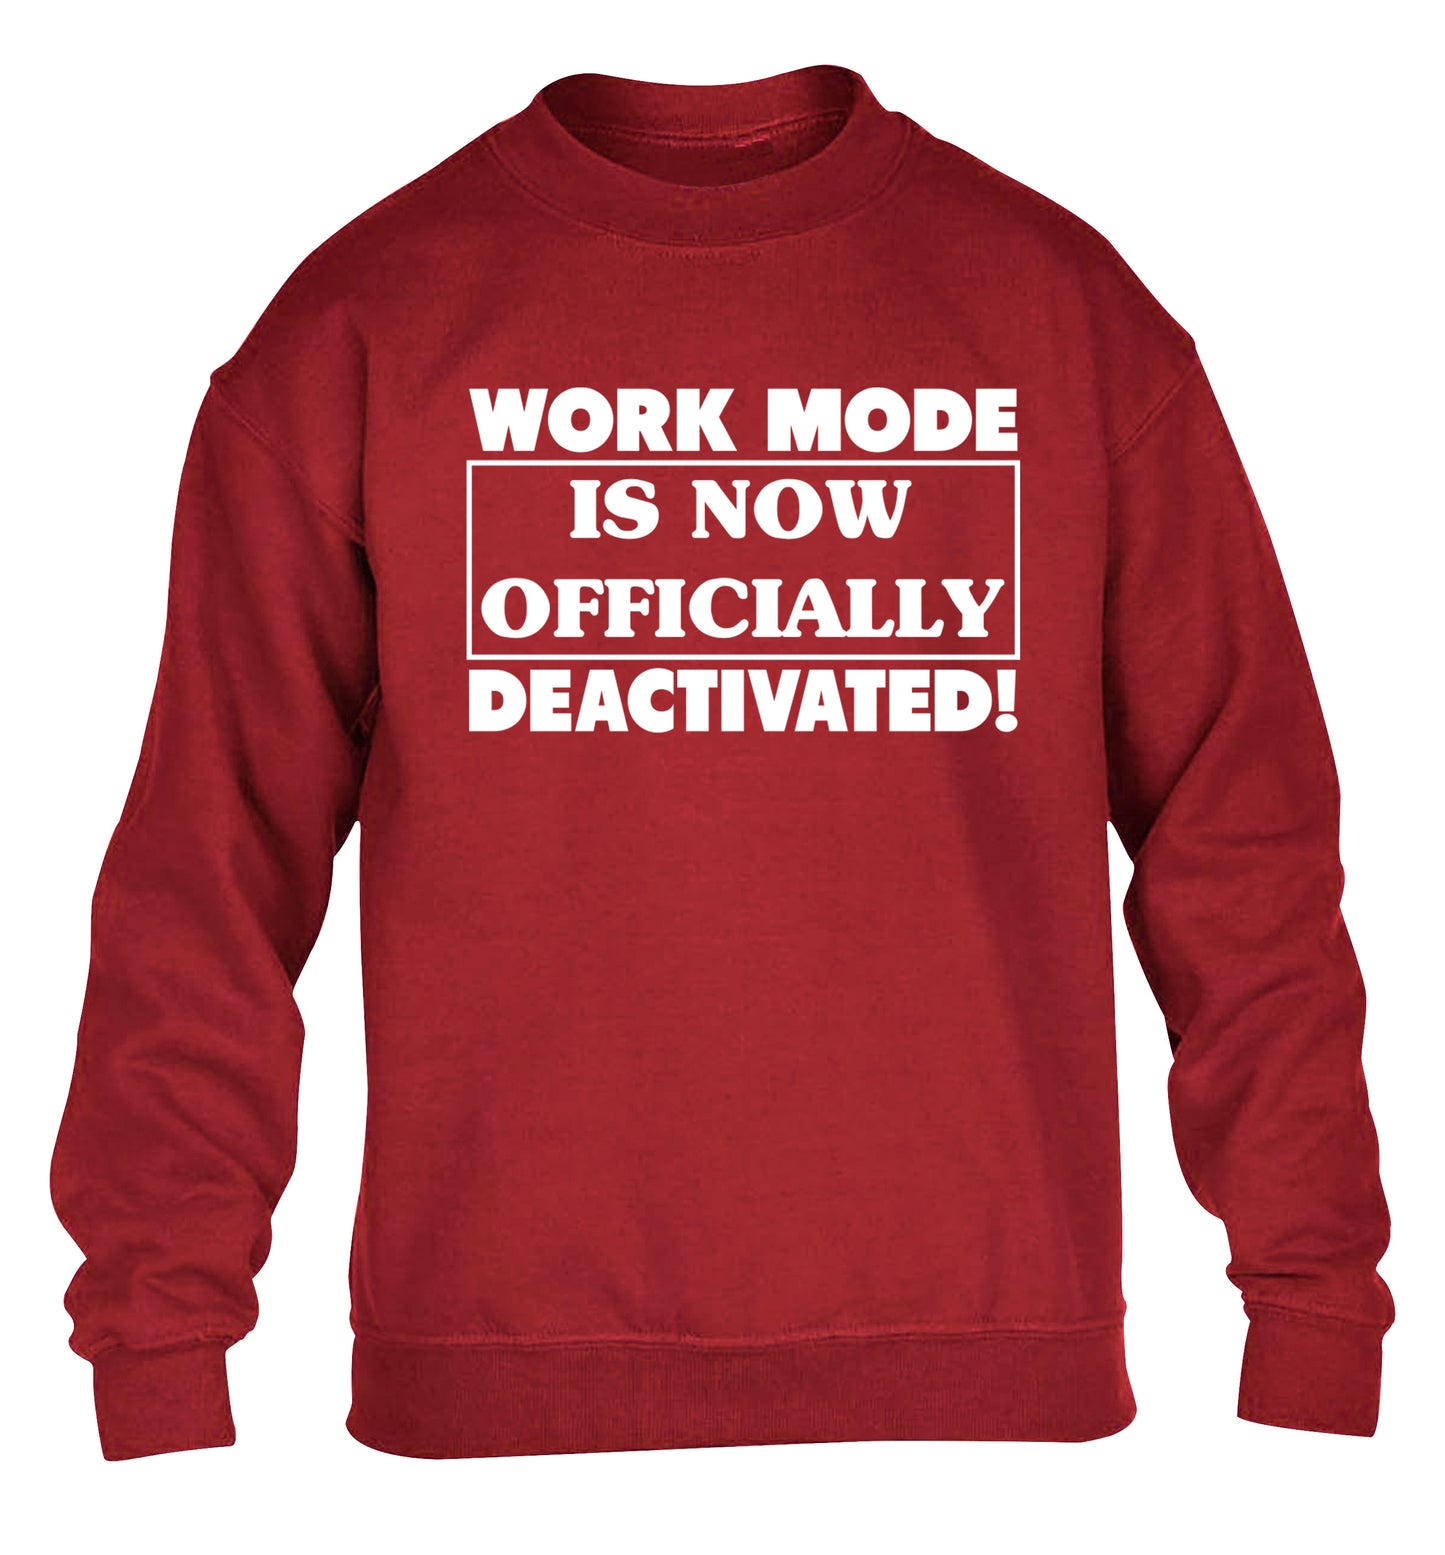 Work mode is now officially deactivated children's grey sweater 12-13 Years